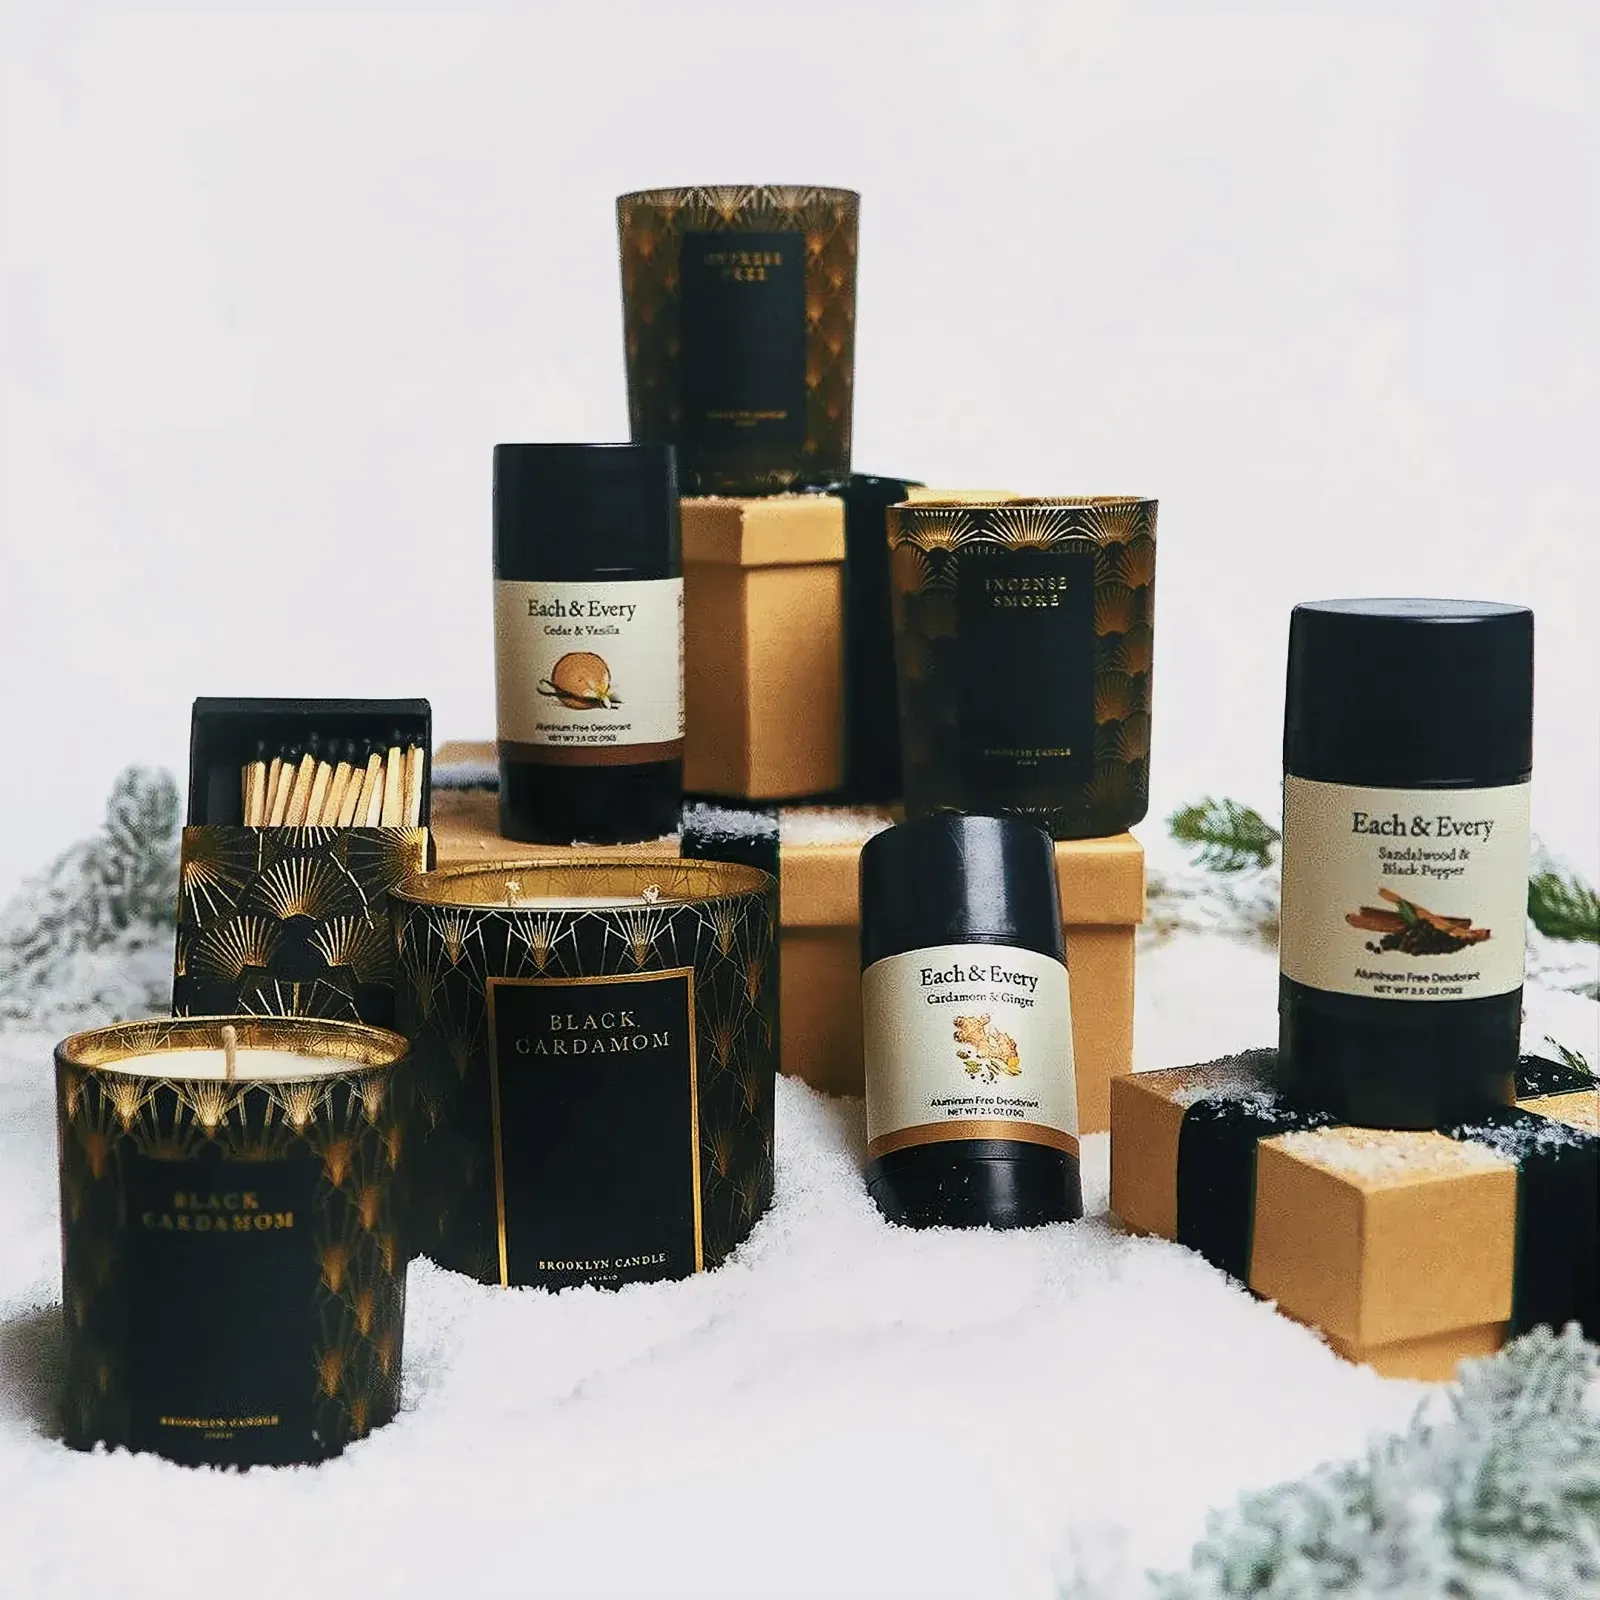 Festive black and gold candles creating a luxurious atmosphere